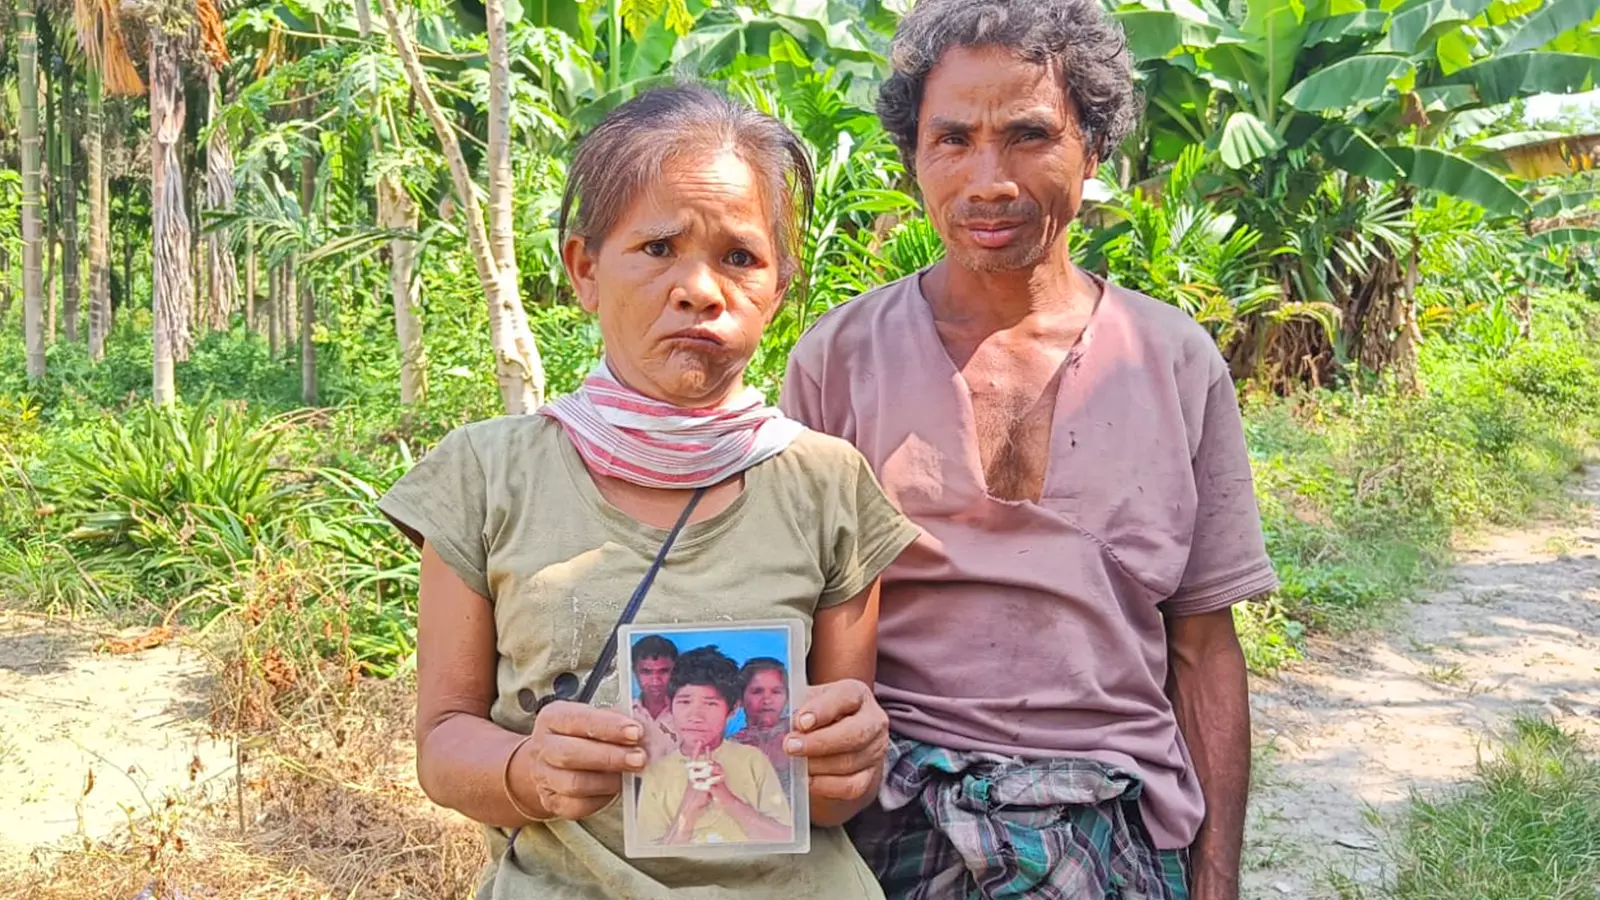 Purudhan Chakma (50) and his wife Liduvi Chakma (45) from Arunachal Pradeshs Changlang district hold the picture of their missing son.